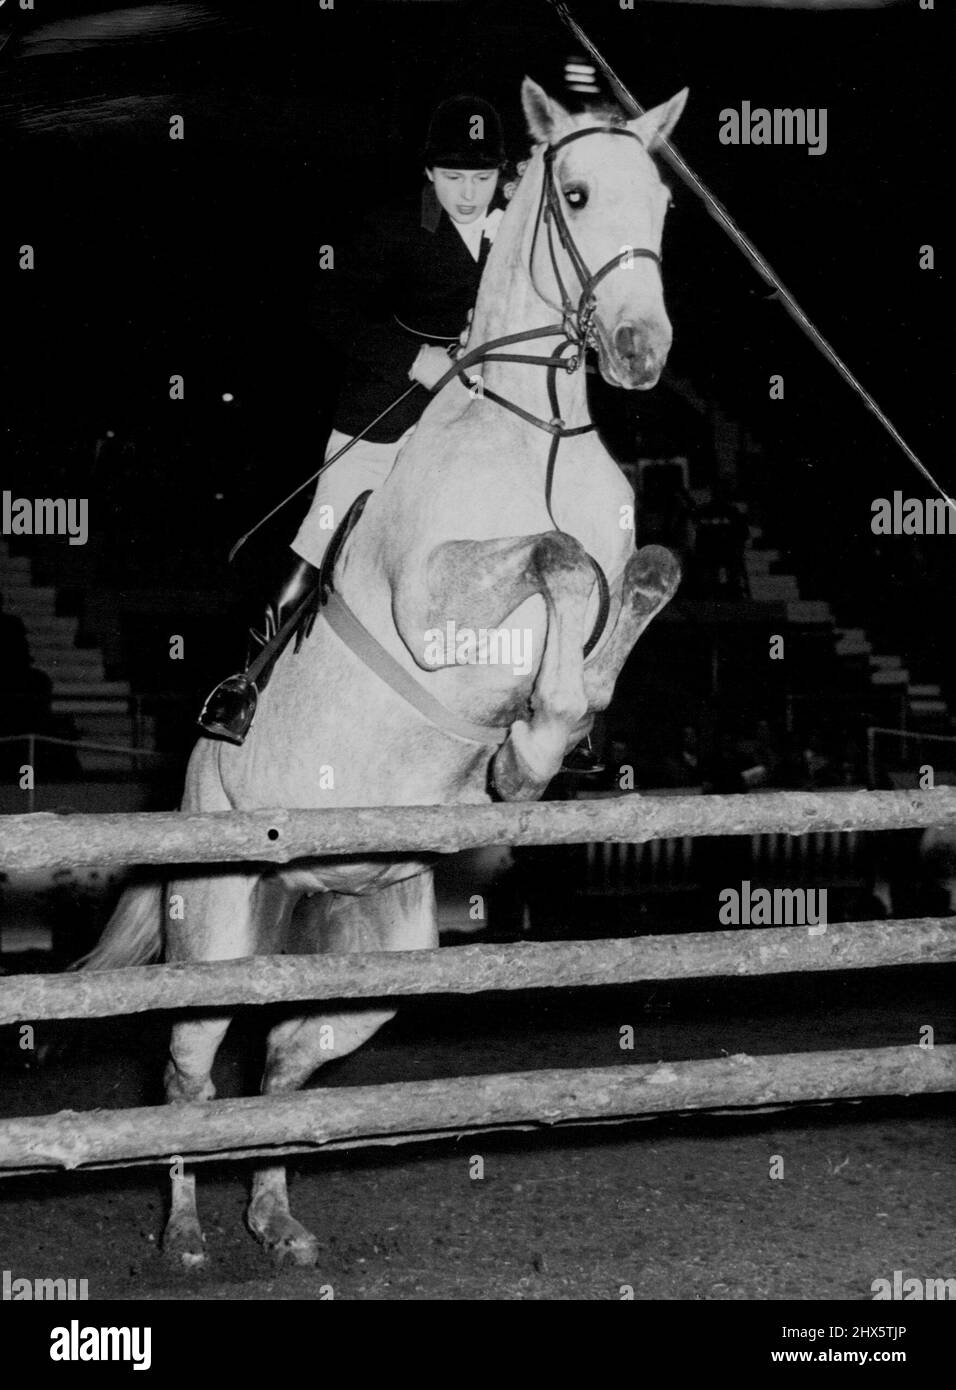 The Foxhunter Championship -- Miss. Pat Smythe, Britain's foremost woman show Jumper, takes 'Prima Donna' over a jump, during the foxhunter championship at Harringay, London. The championship is a part of the horse of the year show. October 18, 1954. (Photo by Paul Popper Ltd.). Stock Photo